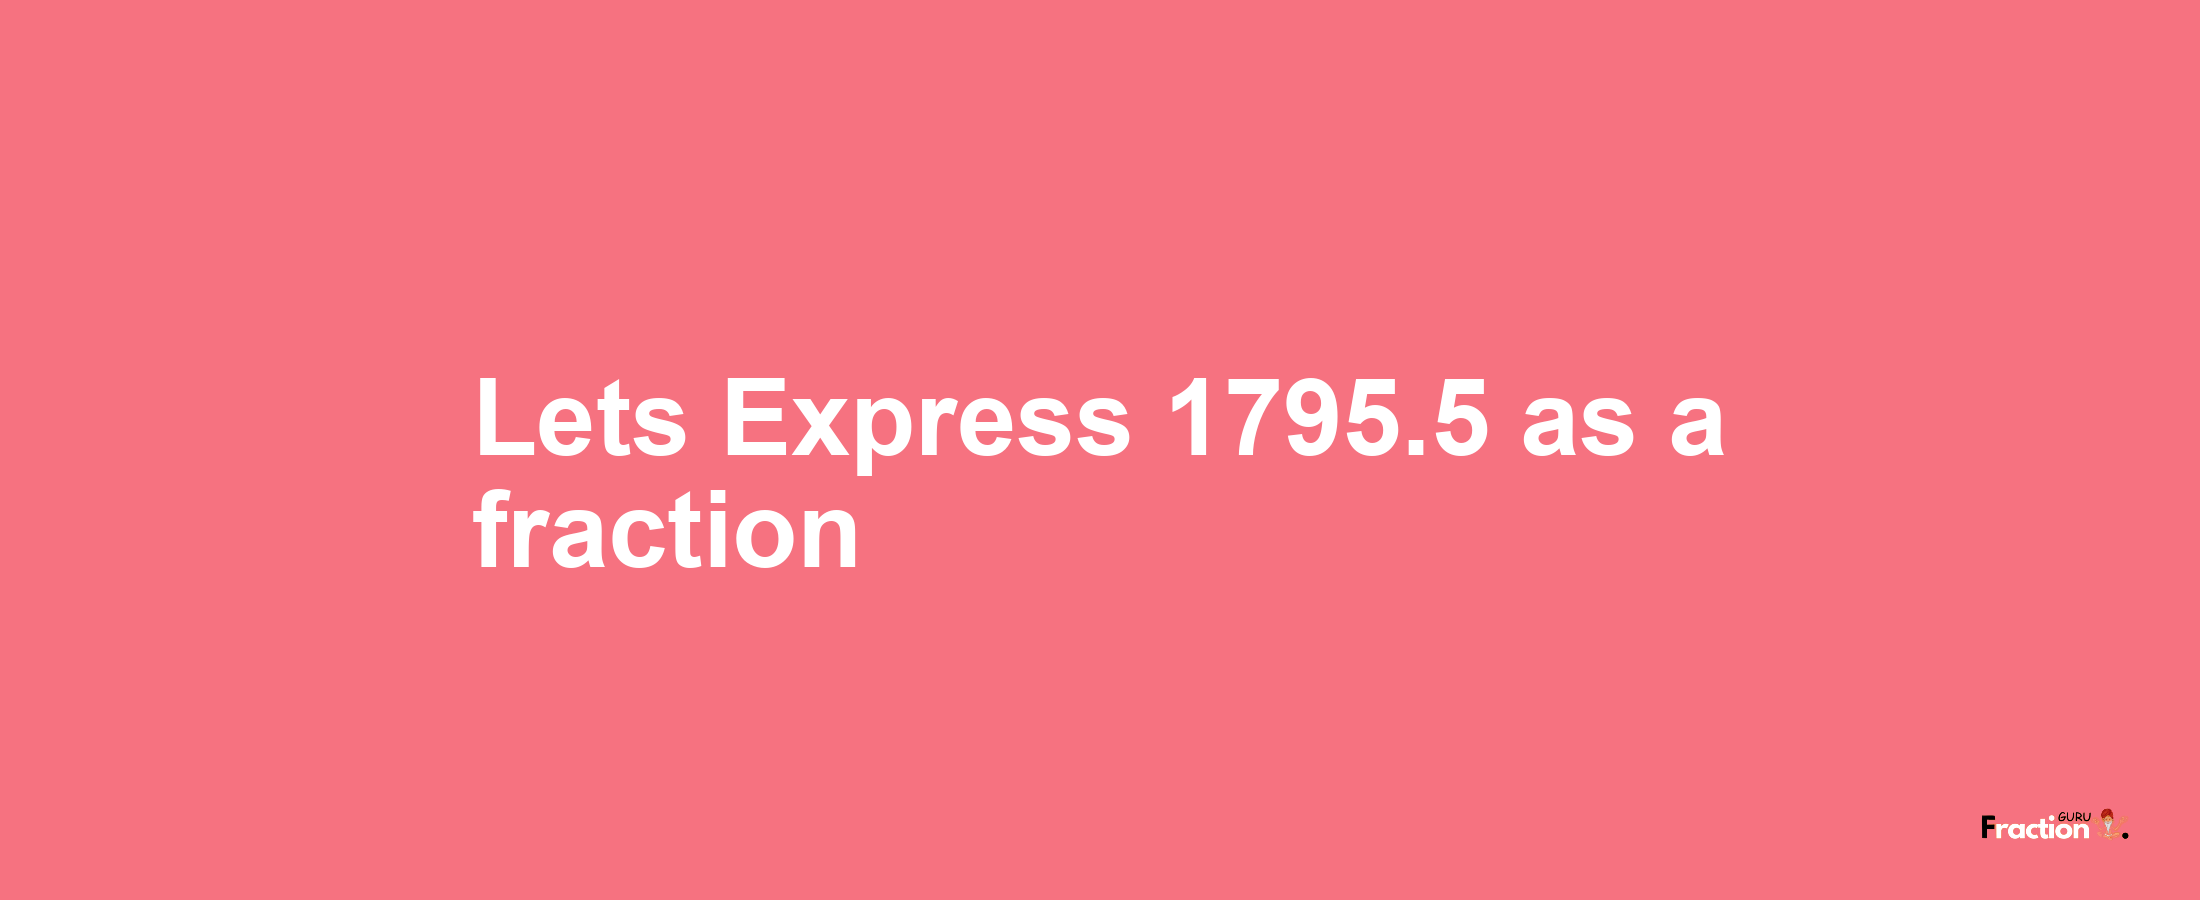 Lets Express 1795.5 as afraction